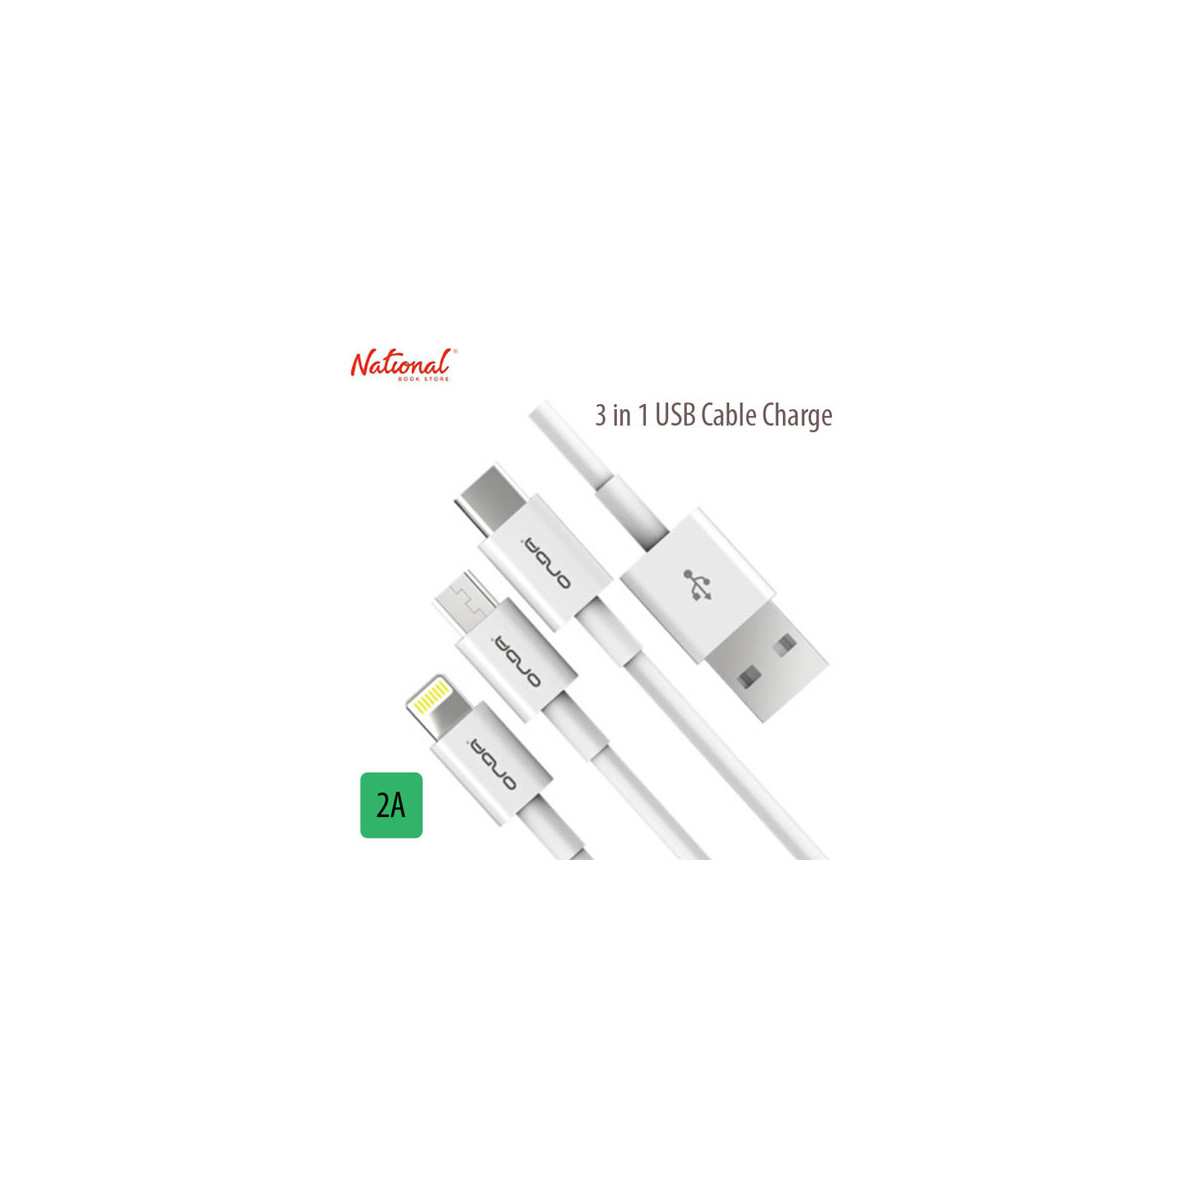 Onda Usb Cable xc13 White 3In1 Cable